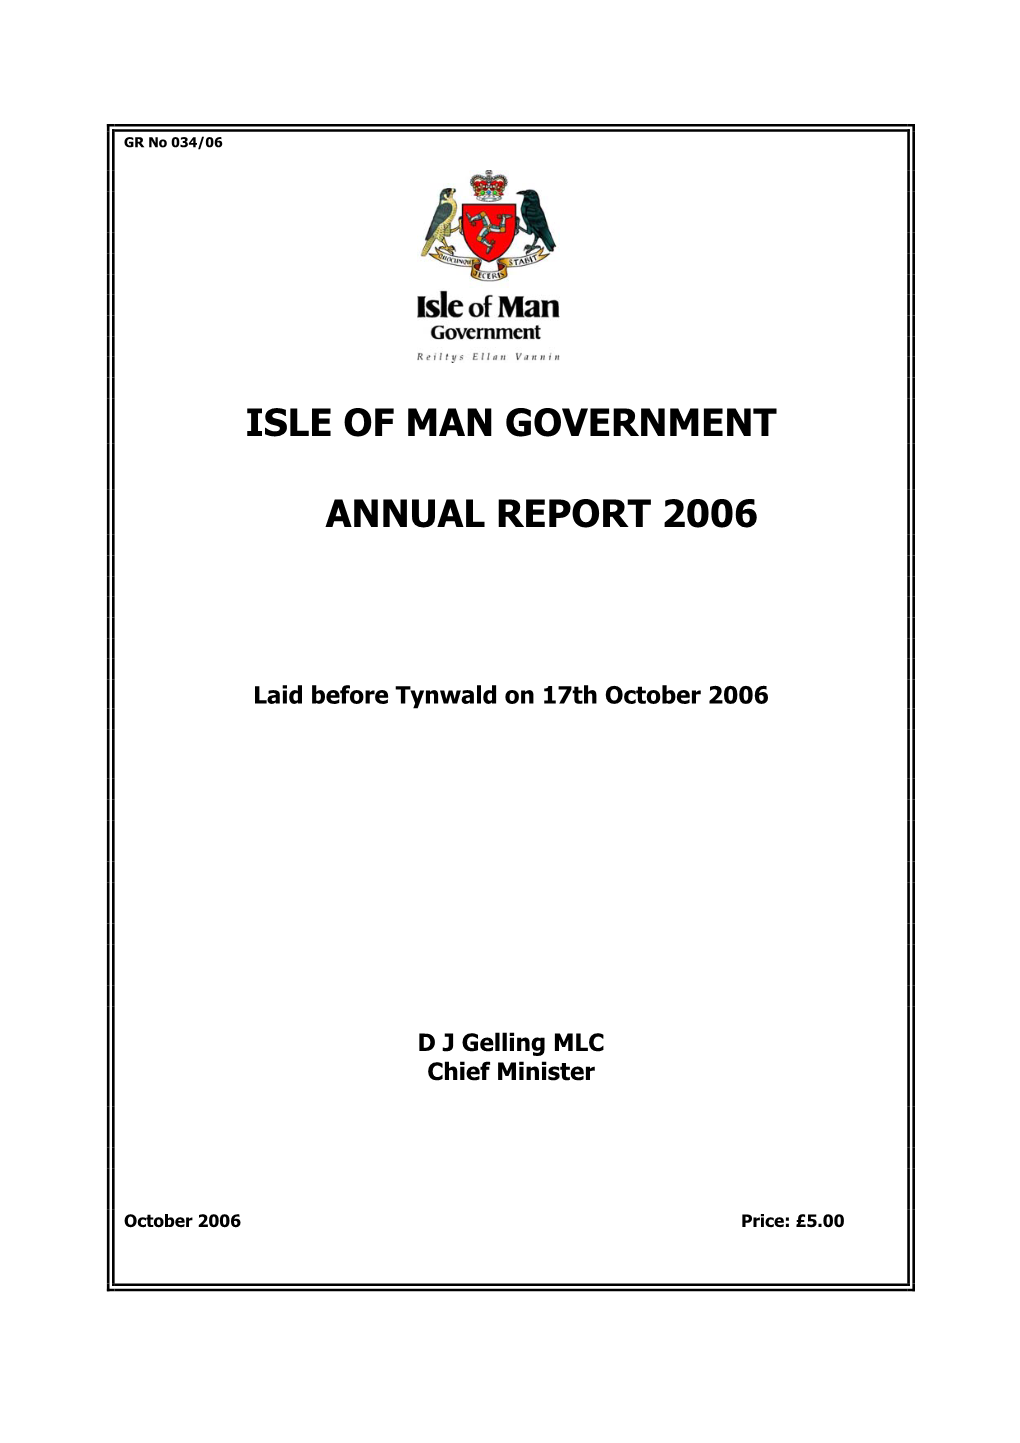 Isle of Man Government Annual Report 2006